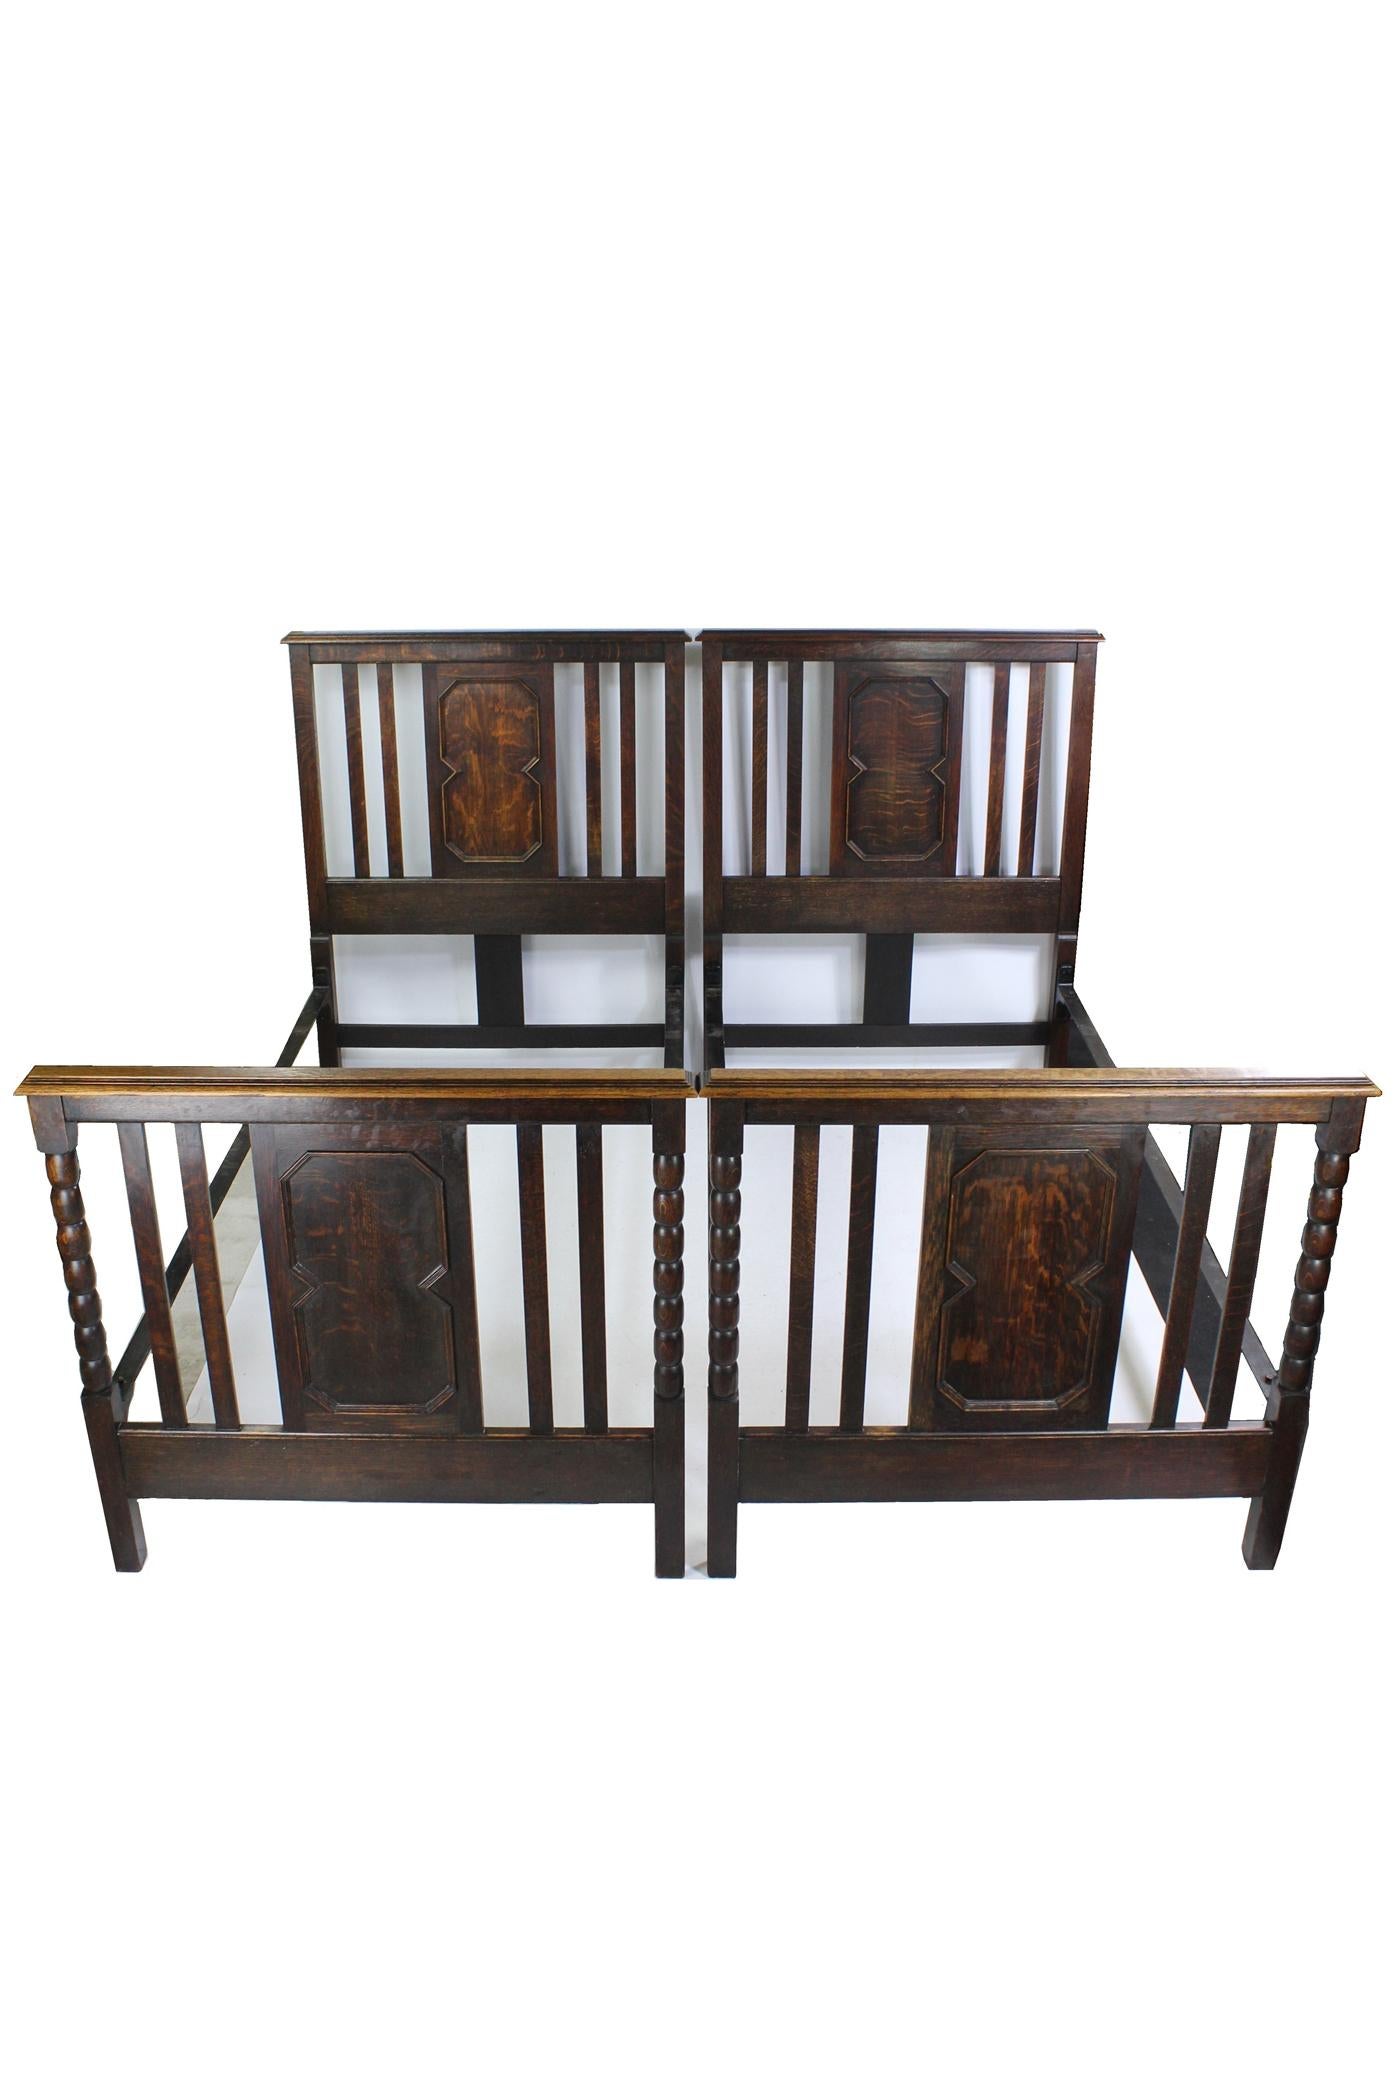 English Pair of Antique Edwardian Oak Single Twin Beds, US Twin Size Bedsteads For Sale